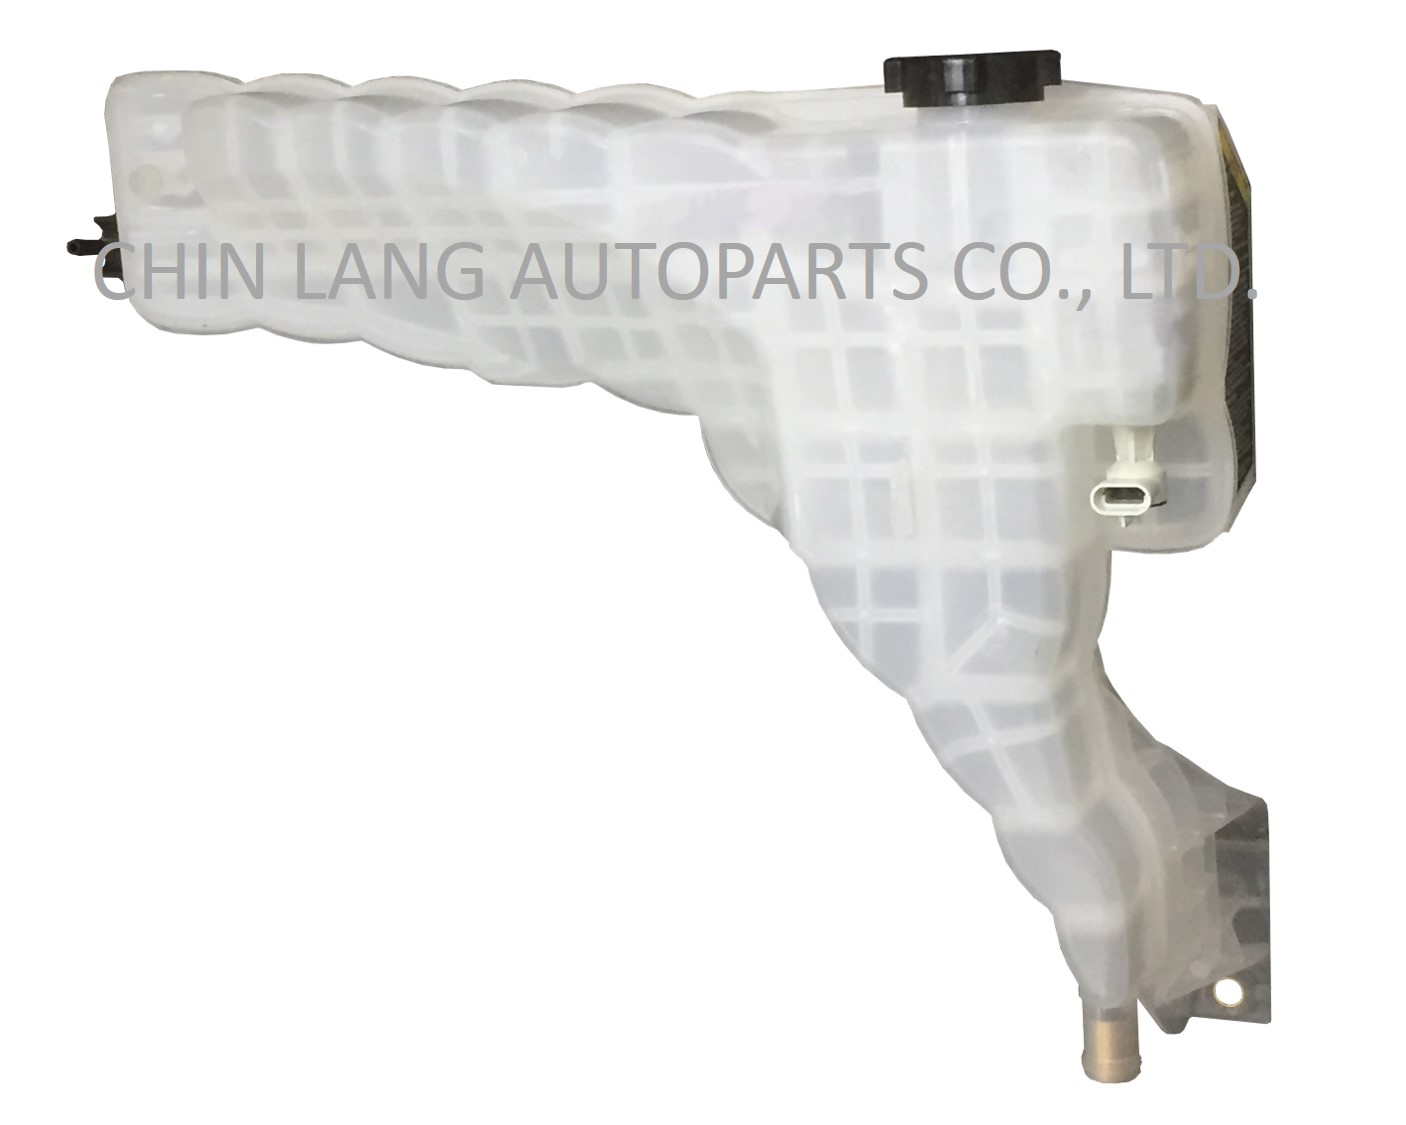 (Copy)-補助桶／副水箱 COOLANT TANK／SURGE TANK FOR FREIGHTLINER CASCADIA 2008~2019-CL-7581